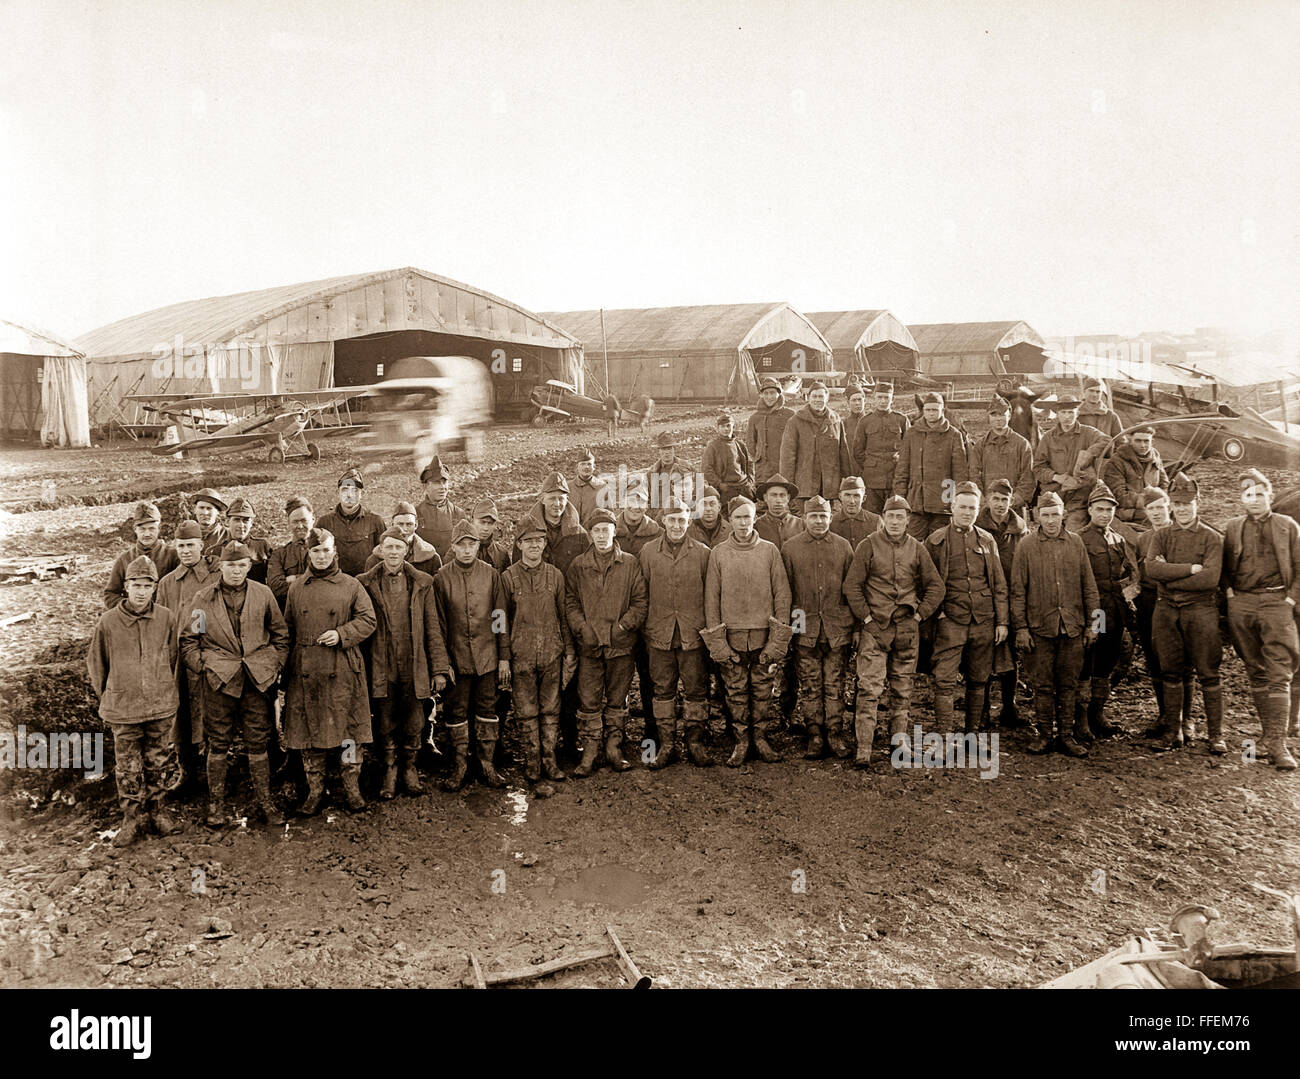 Personnel, 3d Motor Mechanics - 1st Air Depot.  Colombey, France, ca.  1918  This archival print is available in the following sizes:  8' x 10'   $15.95 w/ FREE SHIPPING 11' x 14' $23.95 w/ FREE SHIPPING 16' x 20' $59.95 w/ FREE SHIPPING 20' x 24' $99.95 w/ FREE SHIPPING  * The American Photoarchive watermark will not appear on your print. Stock Photo